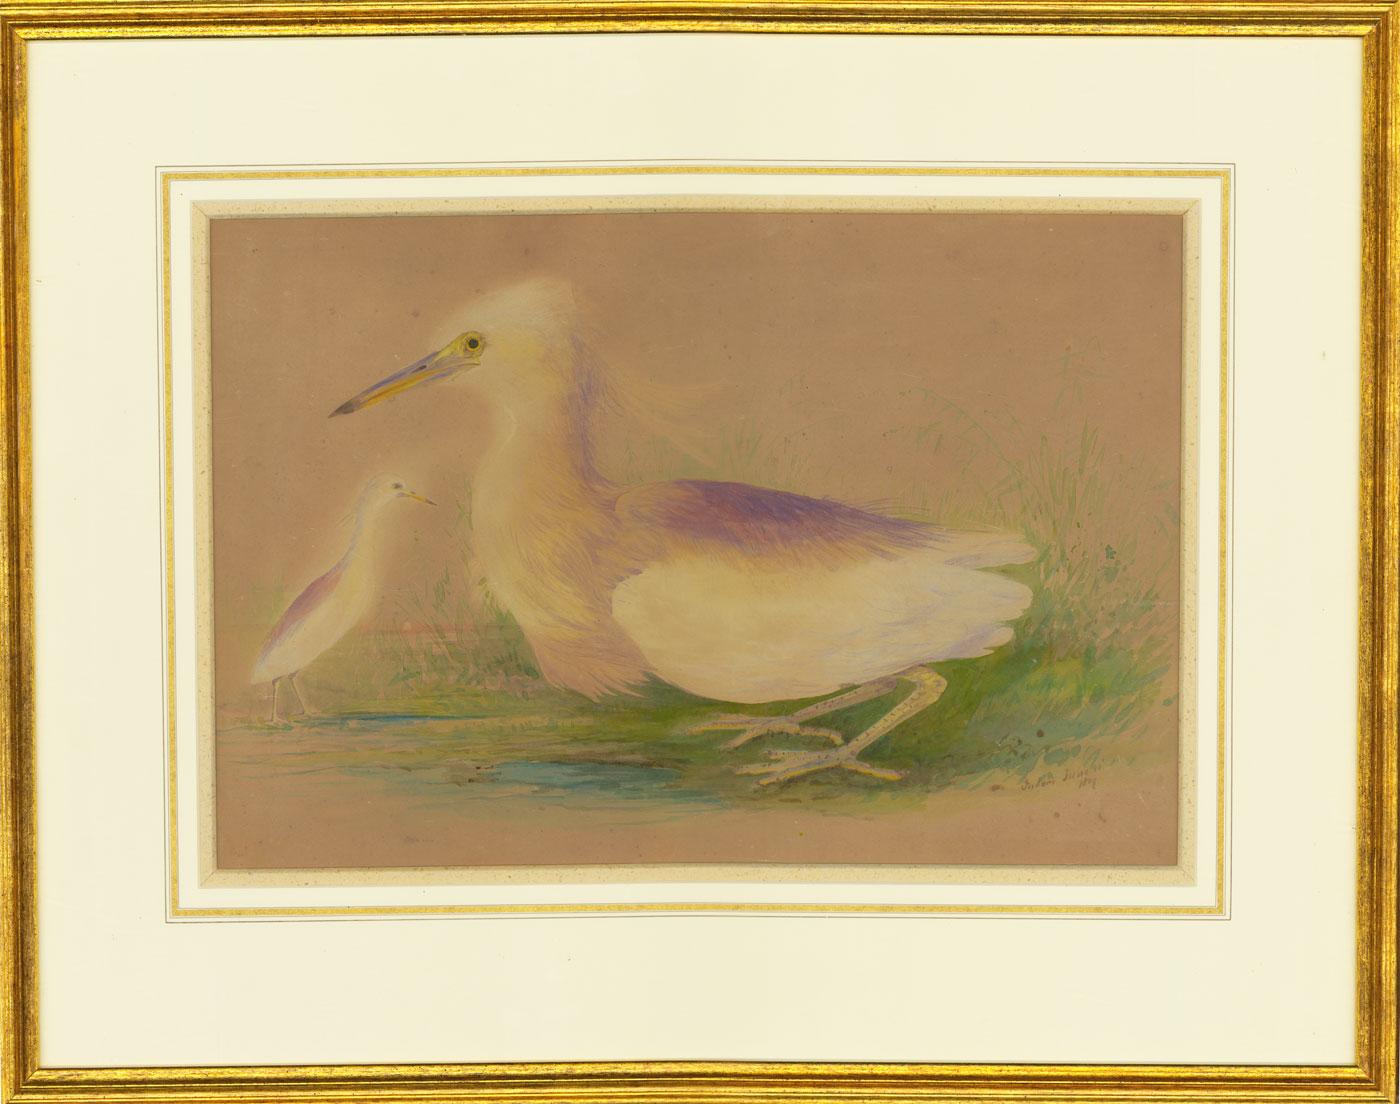 Unknown Animal Art - Framed 1809 Watercolour - A Study of Two Snowy Egrets